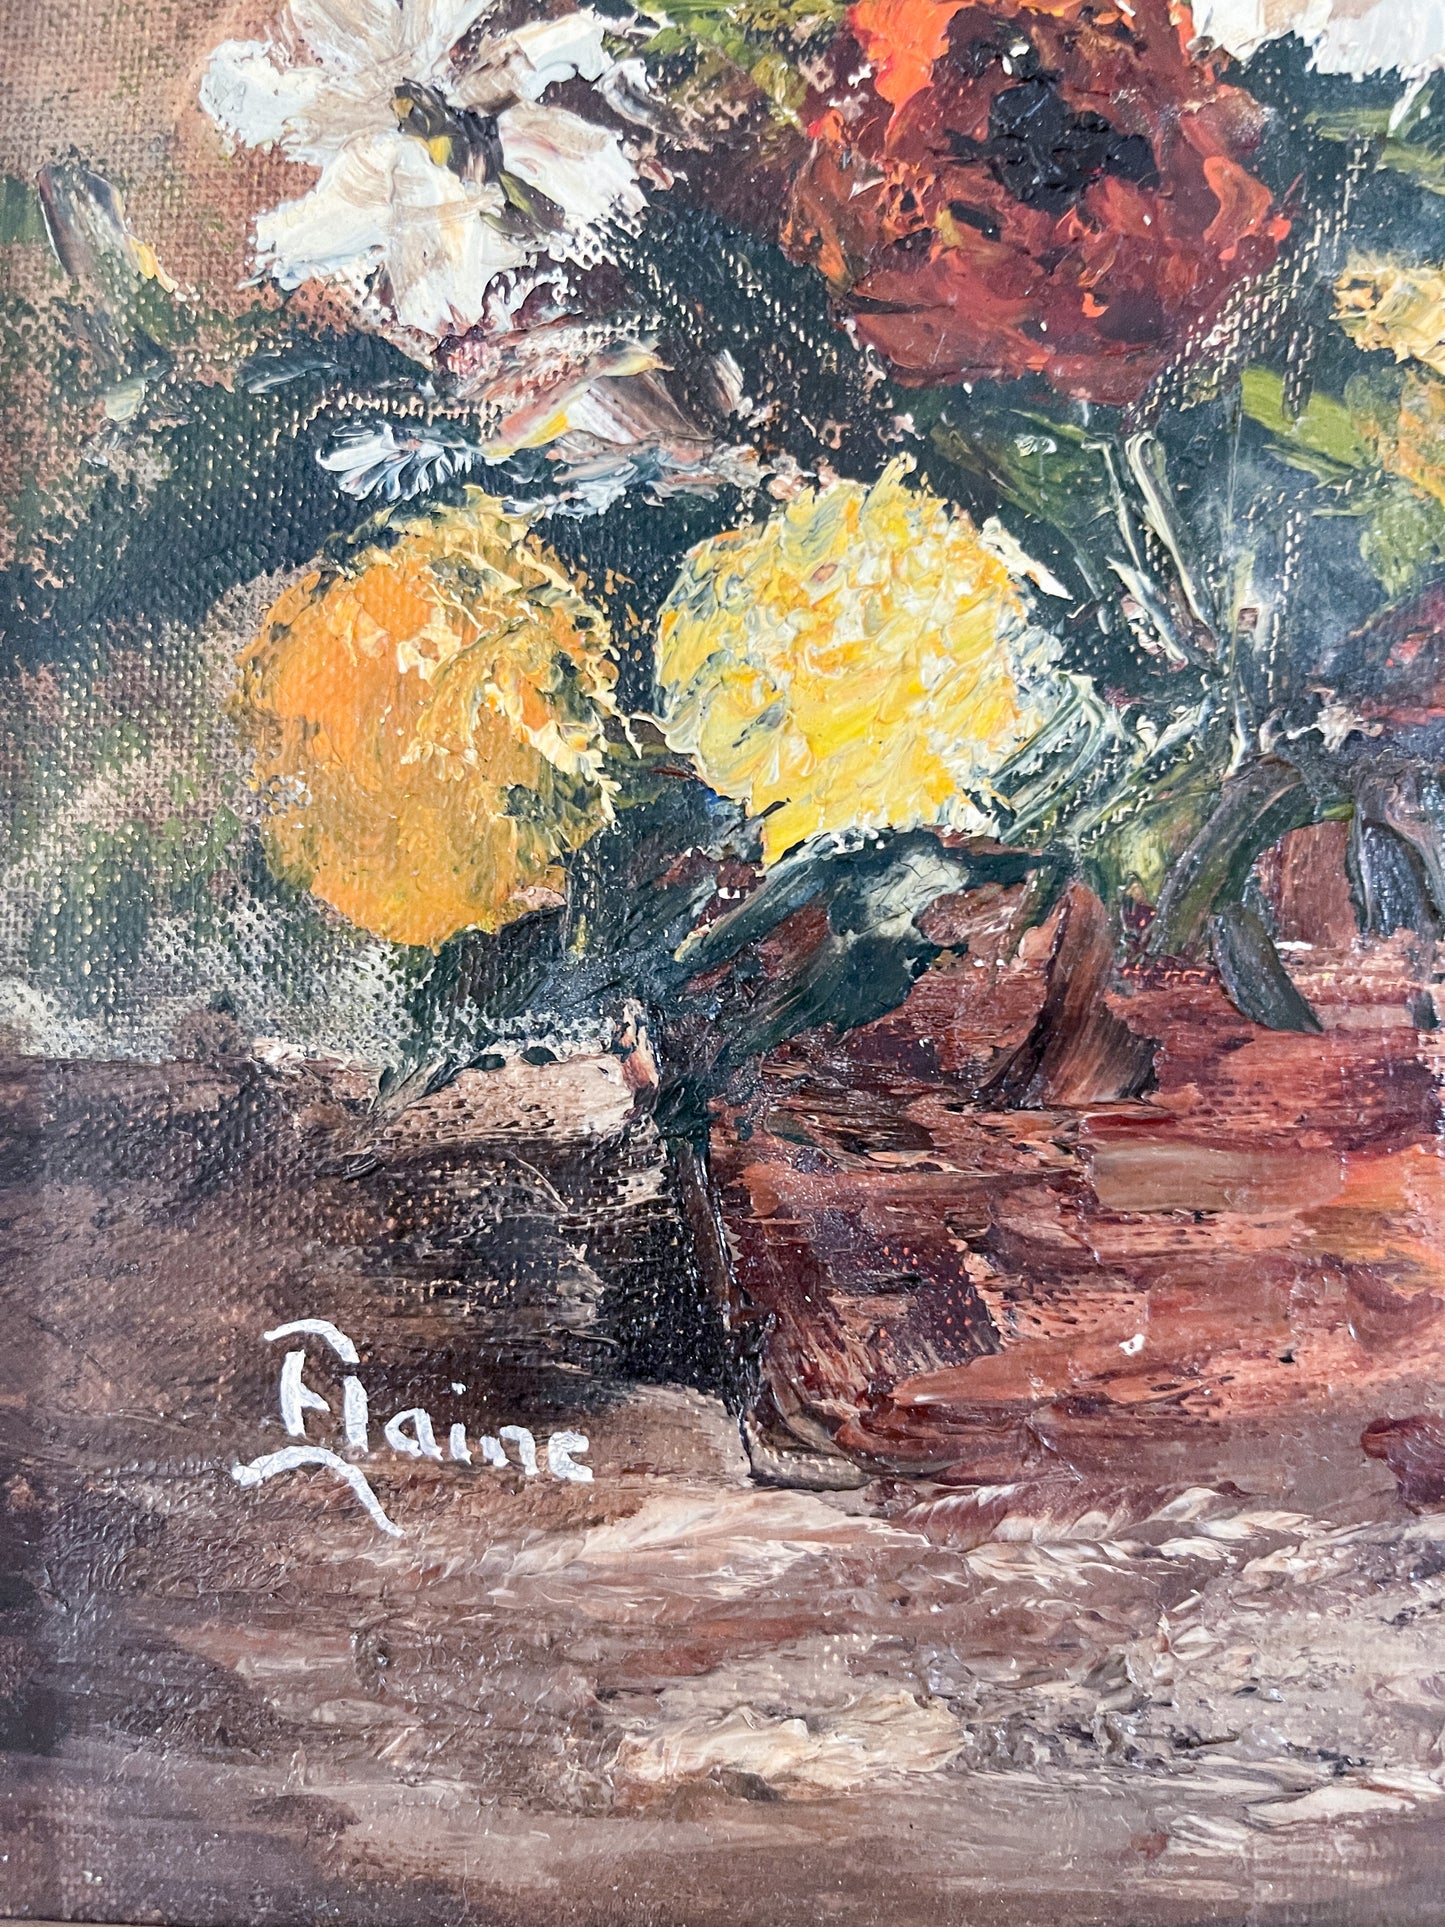 Vintage Still Life Autumnal Floral Painting by Elaine